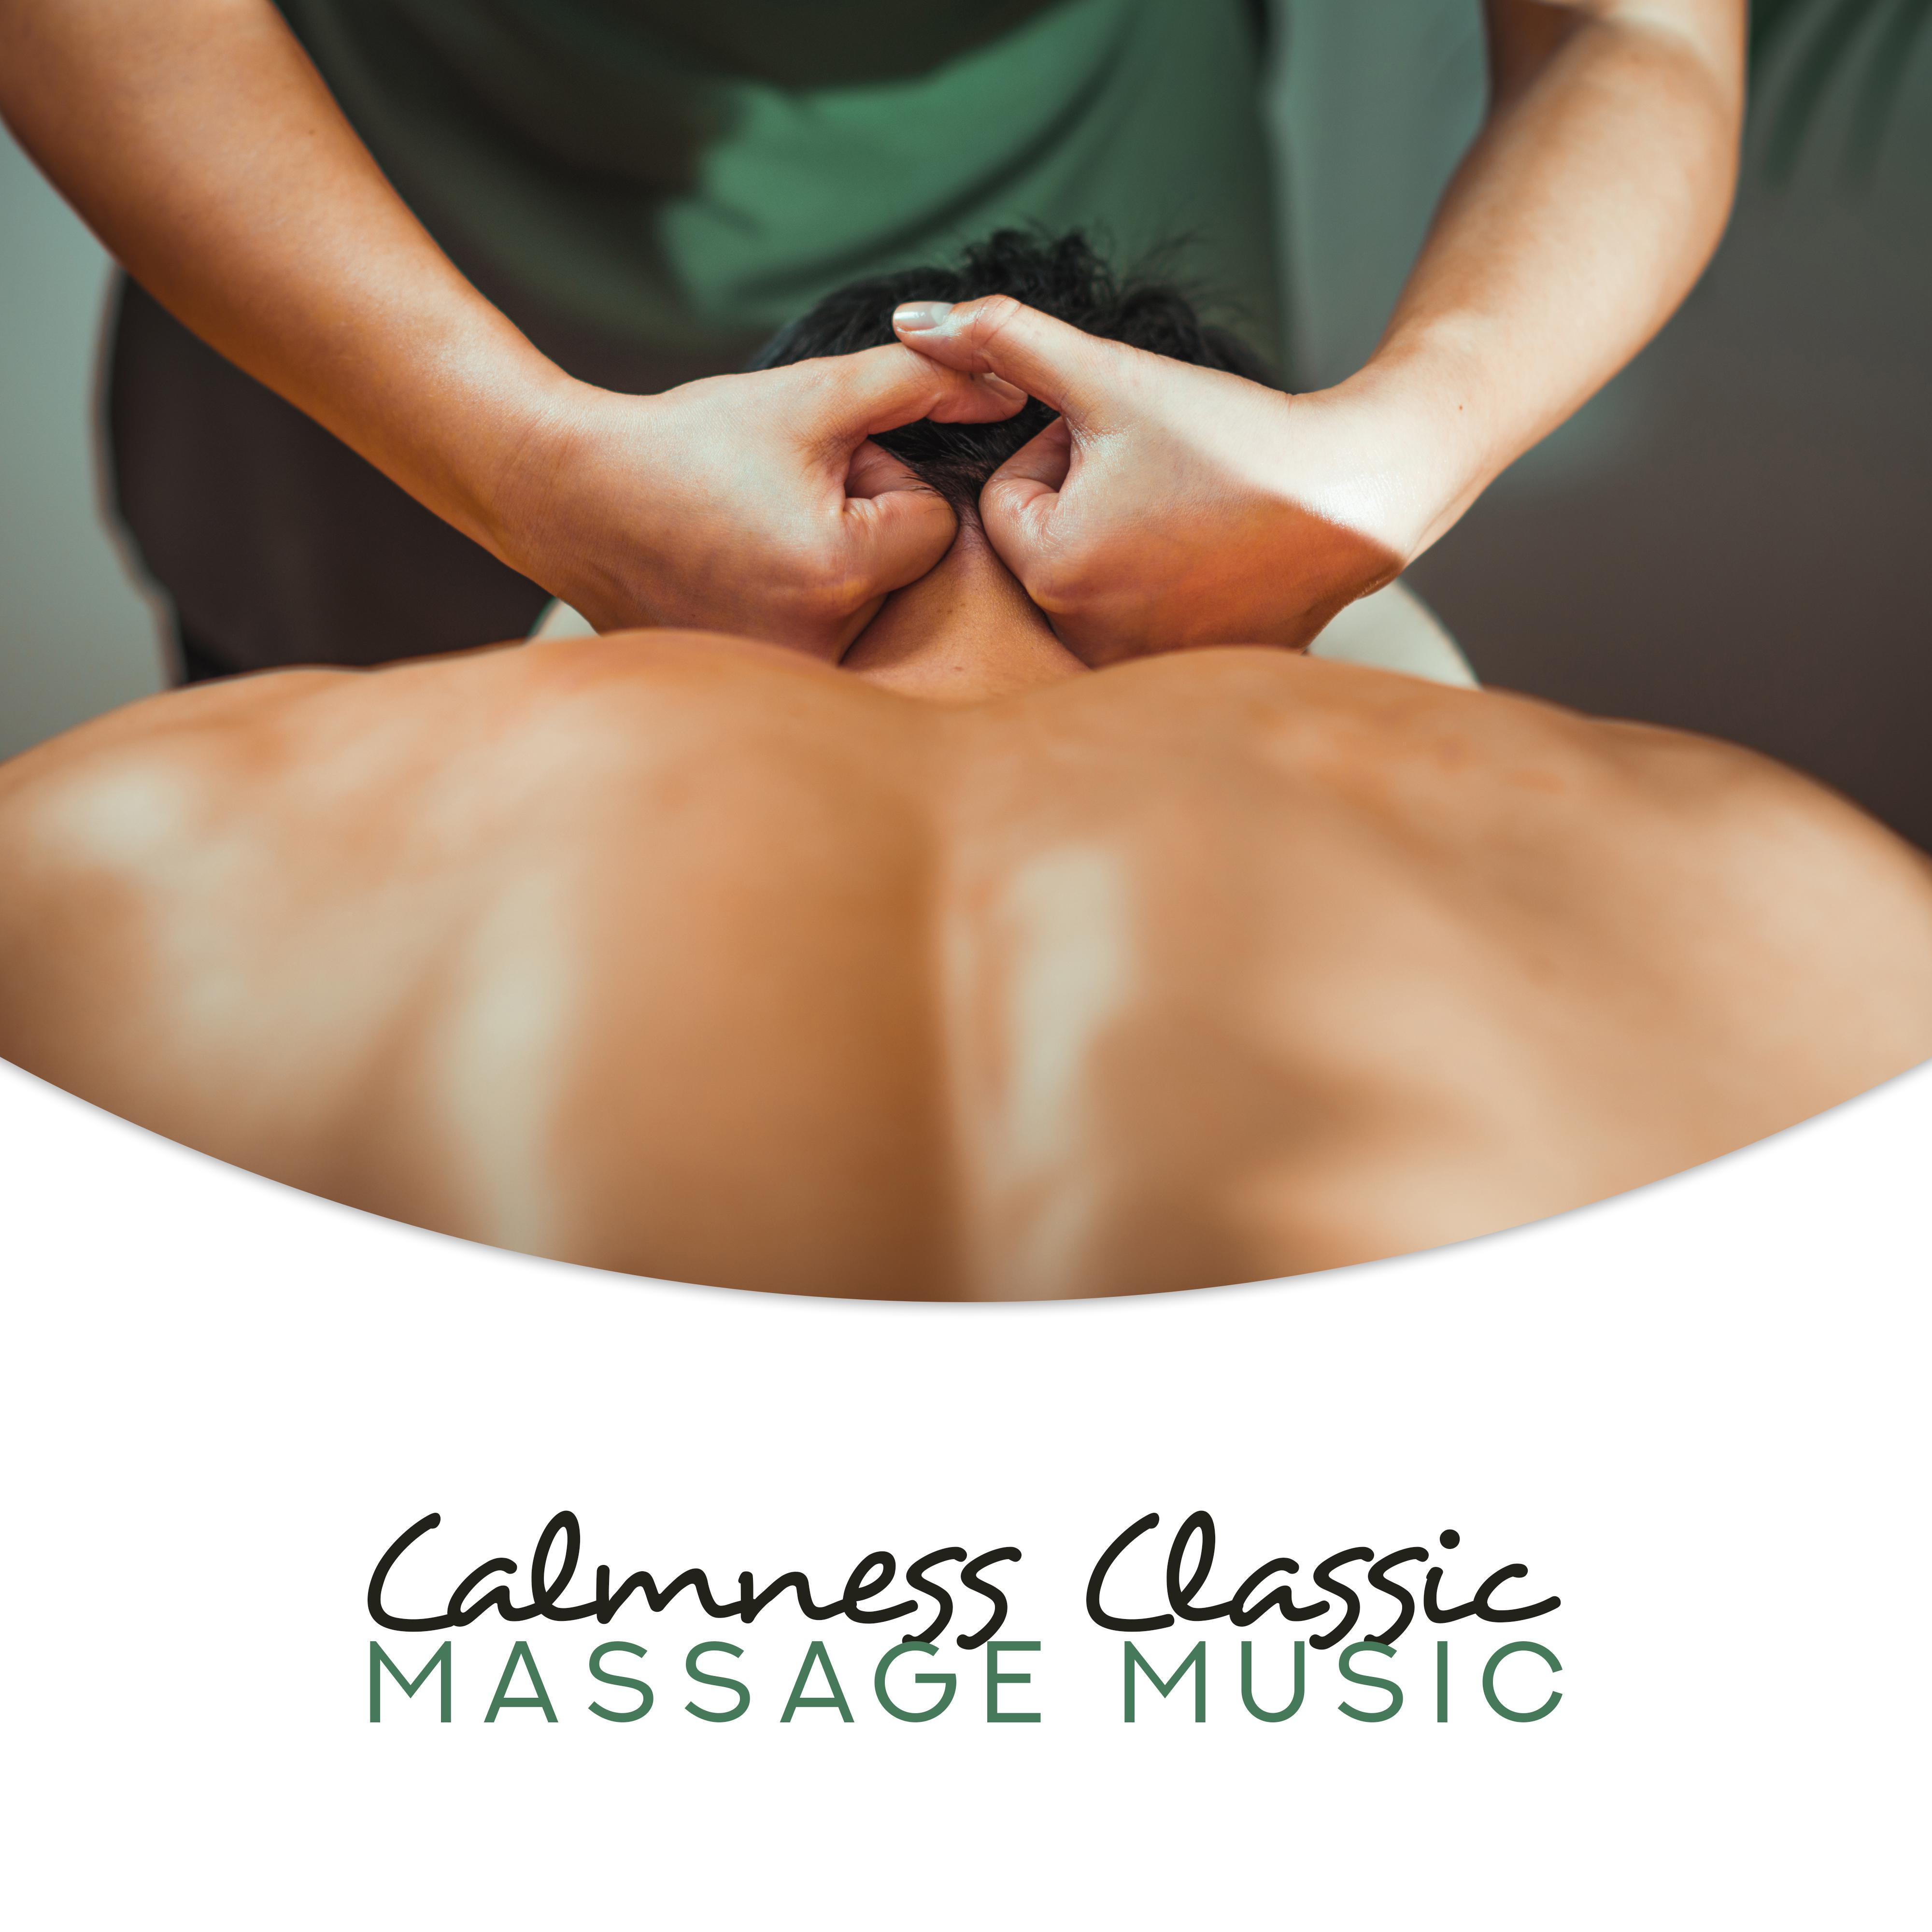 Calmness Classic Massage Music: New Age 2019 Sensual Sounds for Relaxation, Wellness & Spa Songs